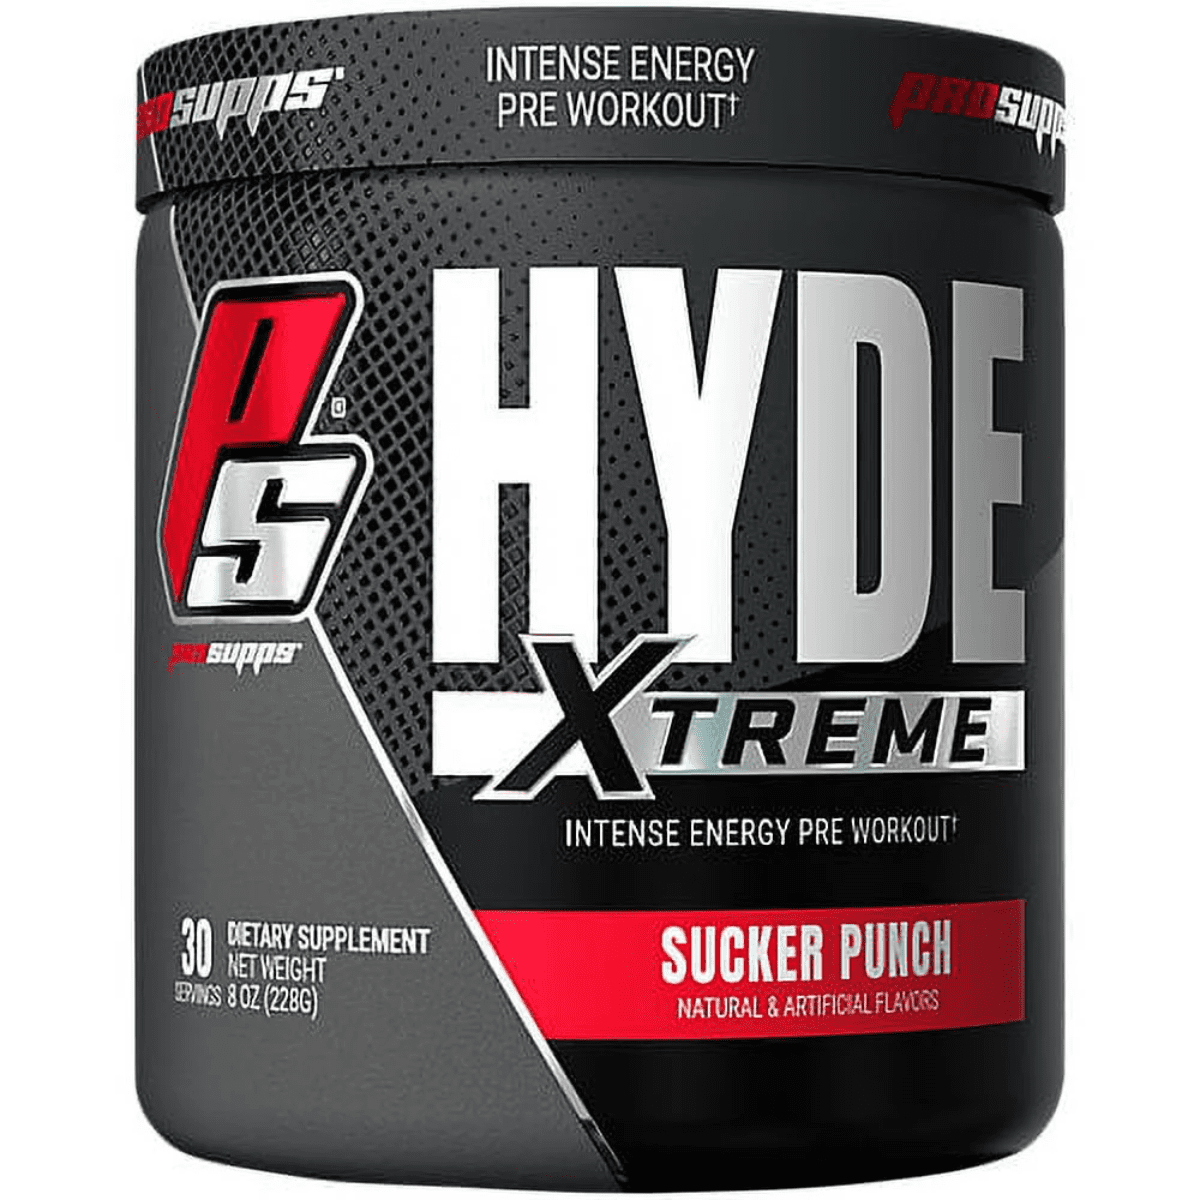 ProSupps Mr.Hyde Xtreme - 3